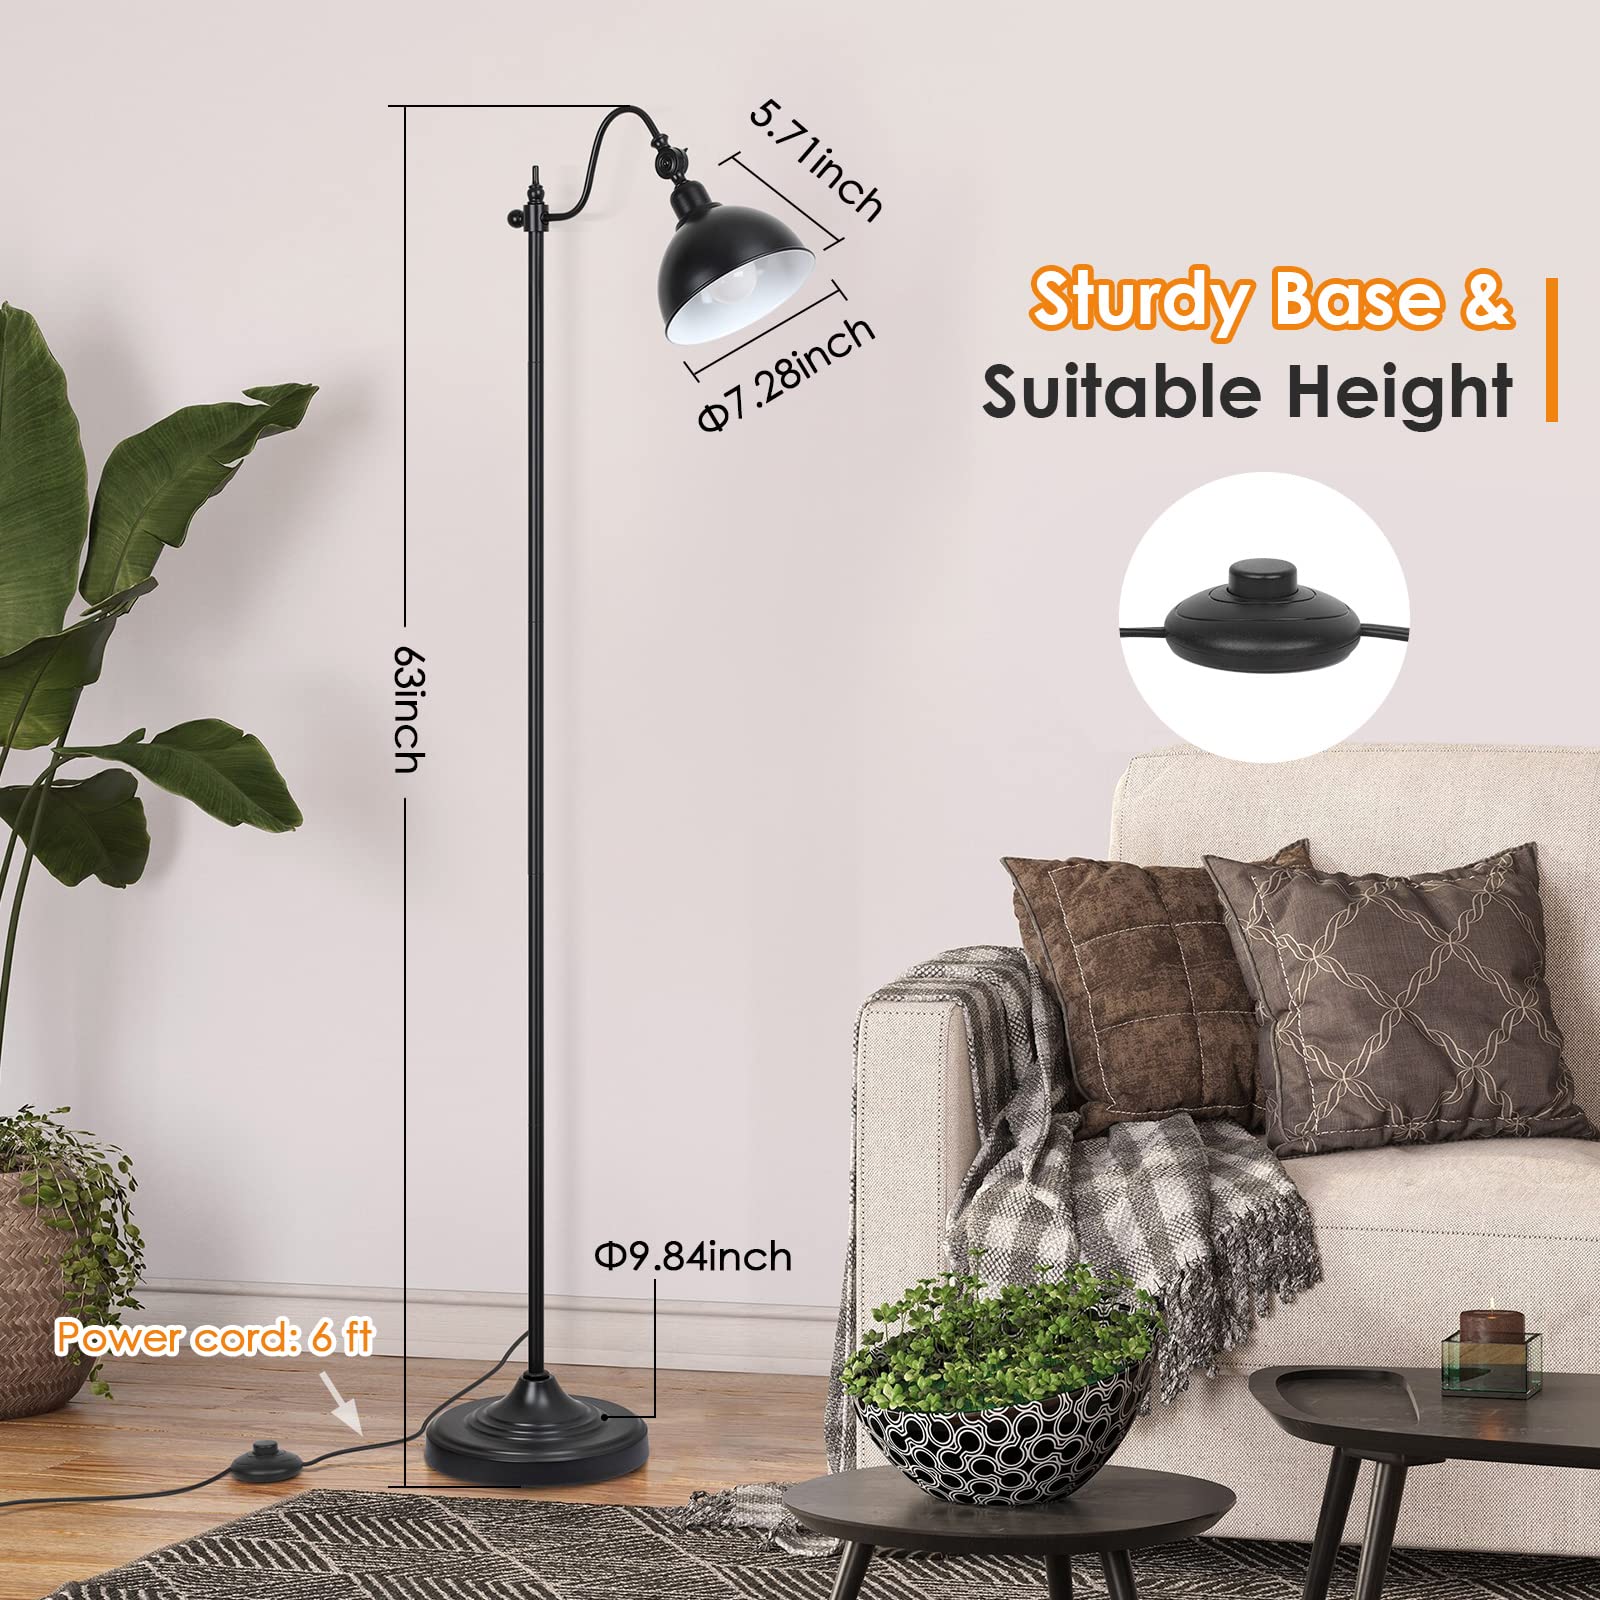 Mlambert Industrial Floor Lamp,63” LED Standing Lamp Modern with 11W A19 LED Bulb,Adjustable Head,Foot Switch,Metal Lamp for Livingroom,Stand Light